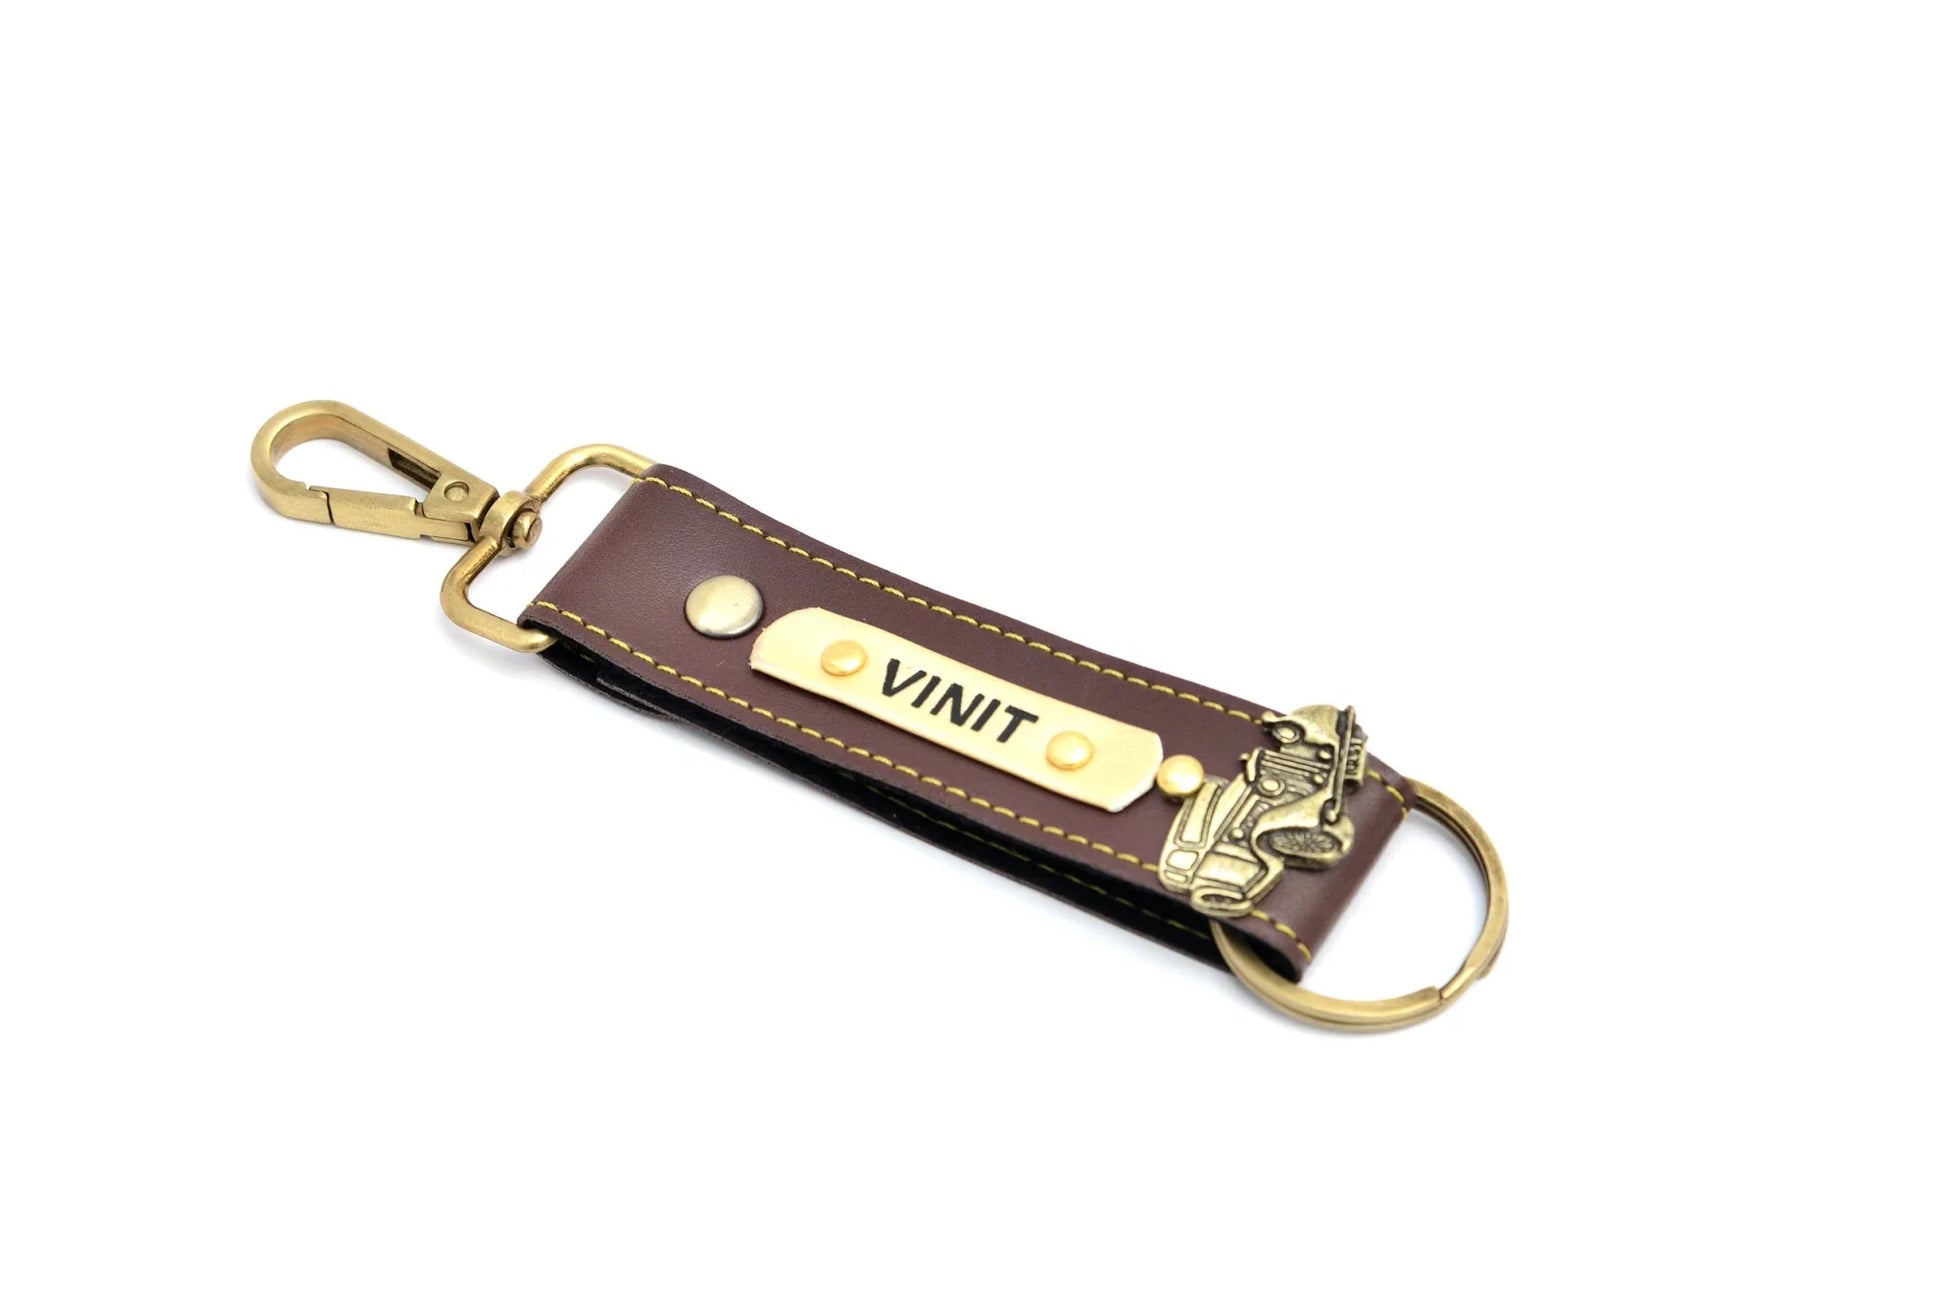 Avoid confusion with the help of these creative keychains.